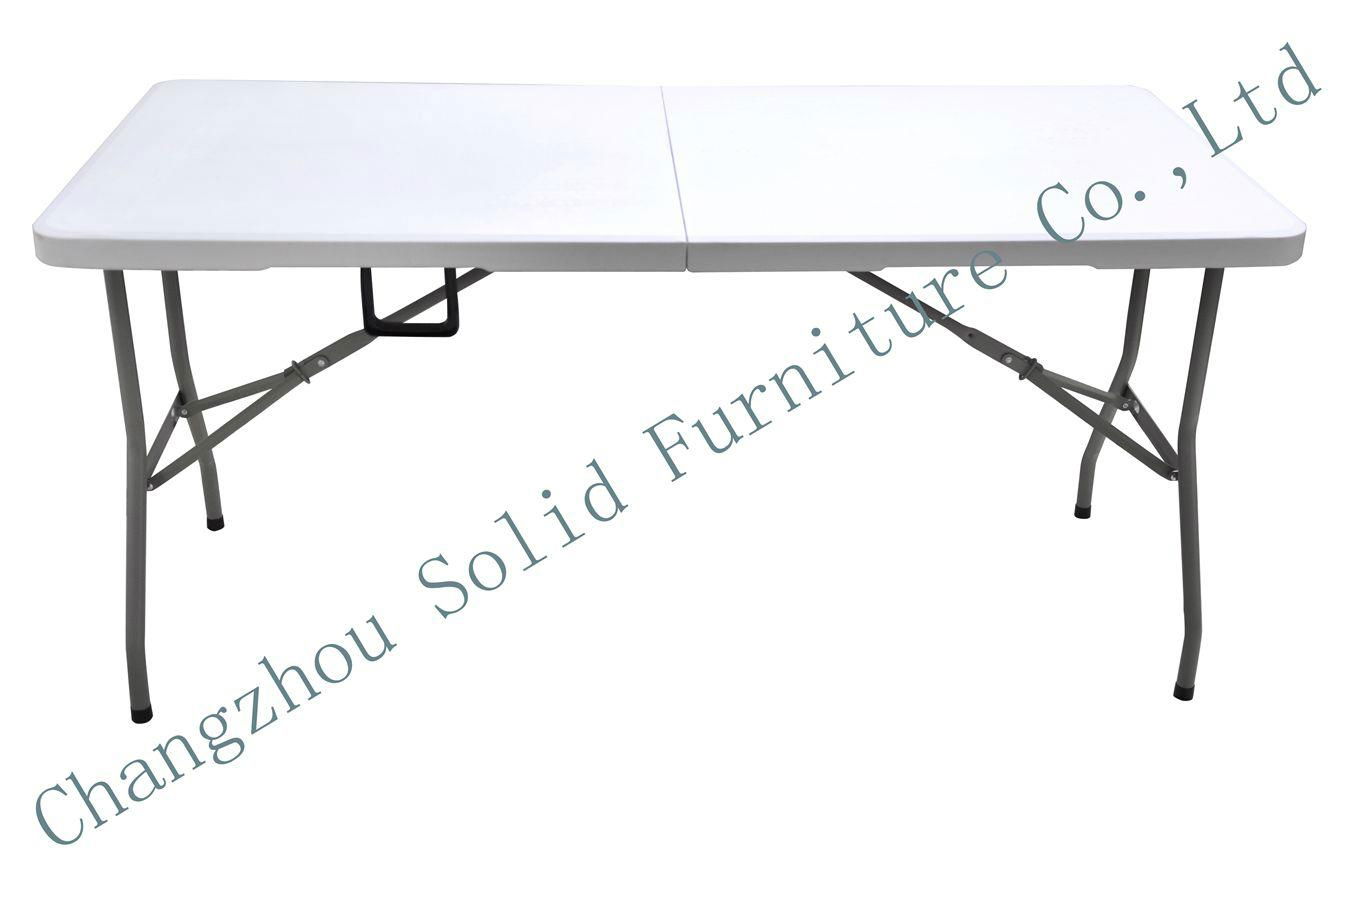 Z152 5FT fold in half table HDPE plastic foldable table 